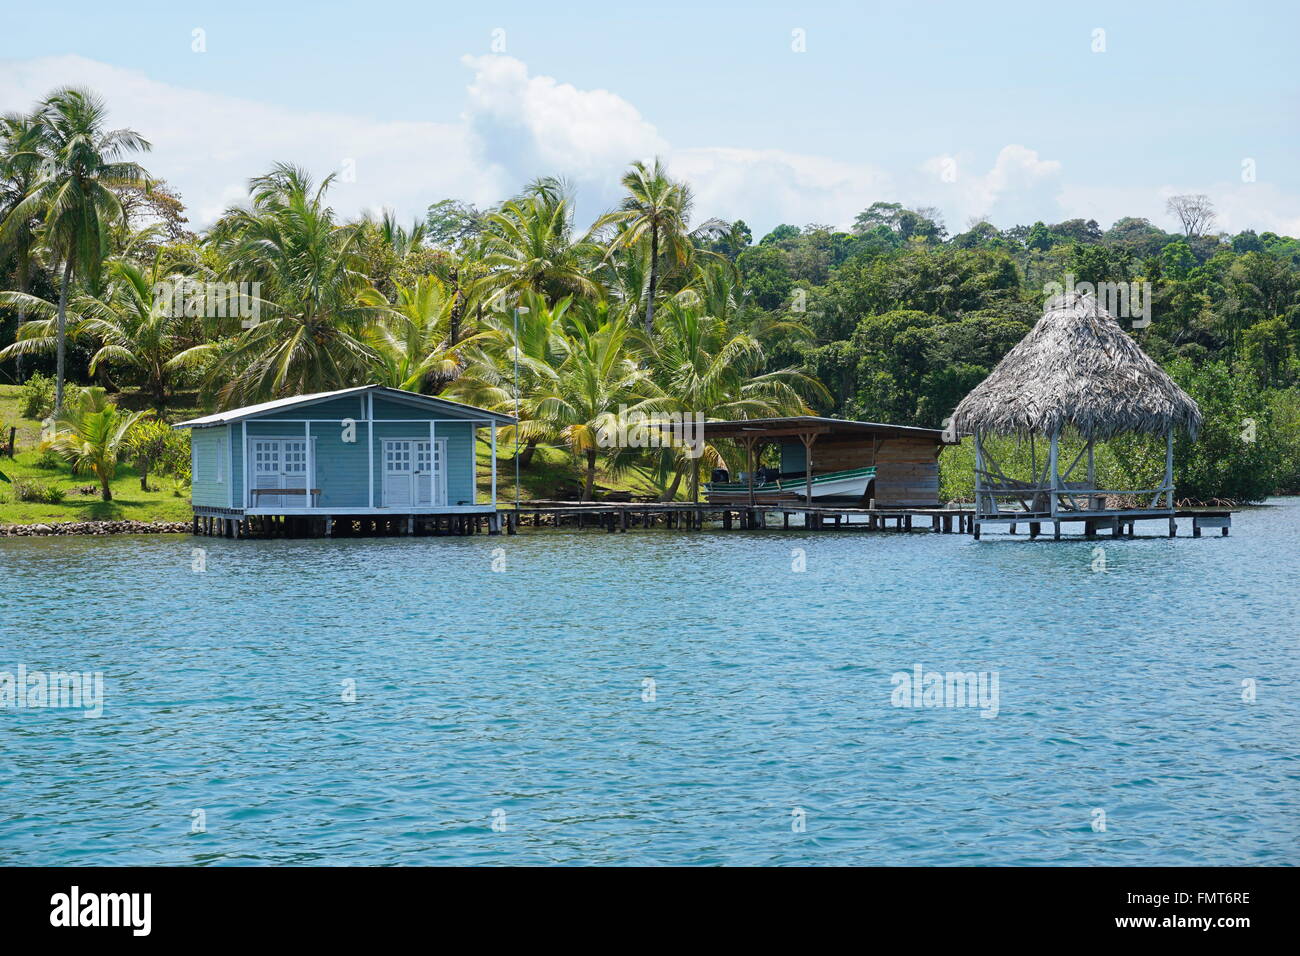 Tropical shore with small house and thatched hut over the water in Bocas del Toro, Caribbean coast of Panama, Central America Stock Photo